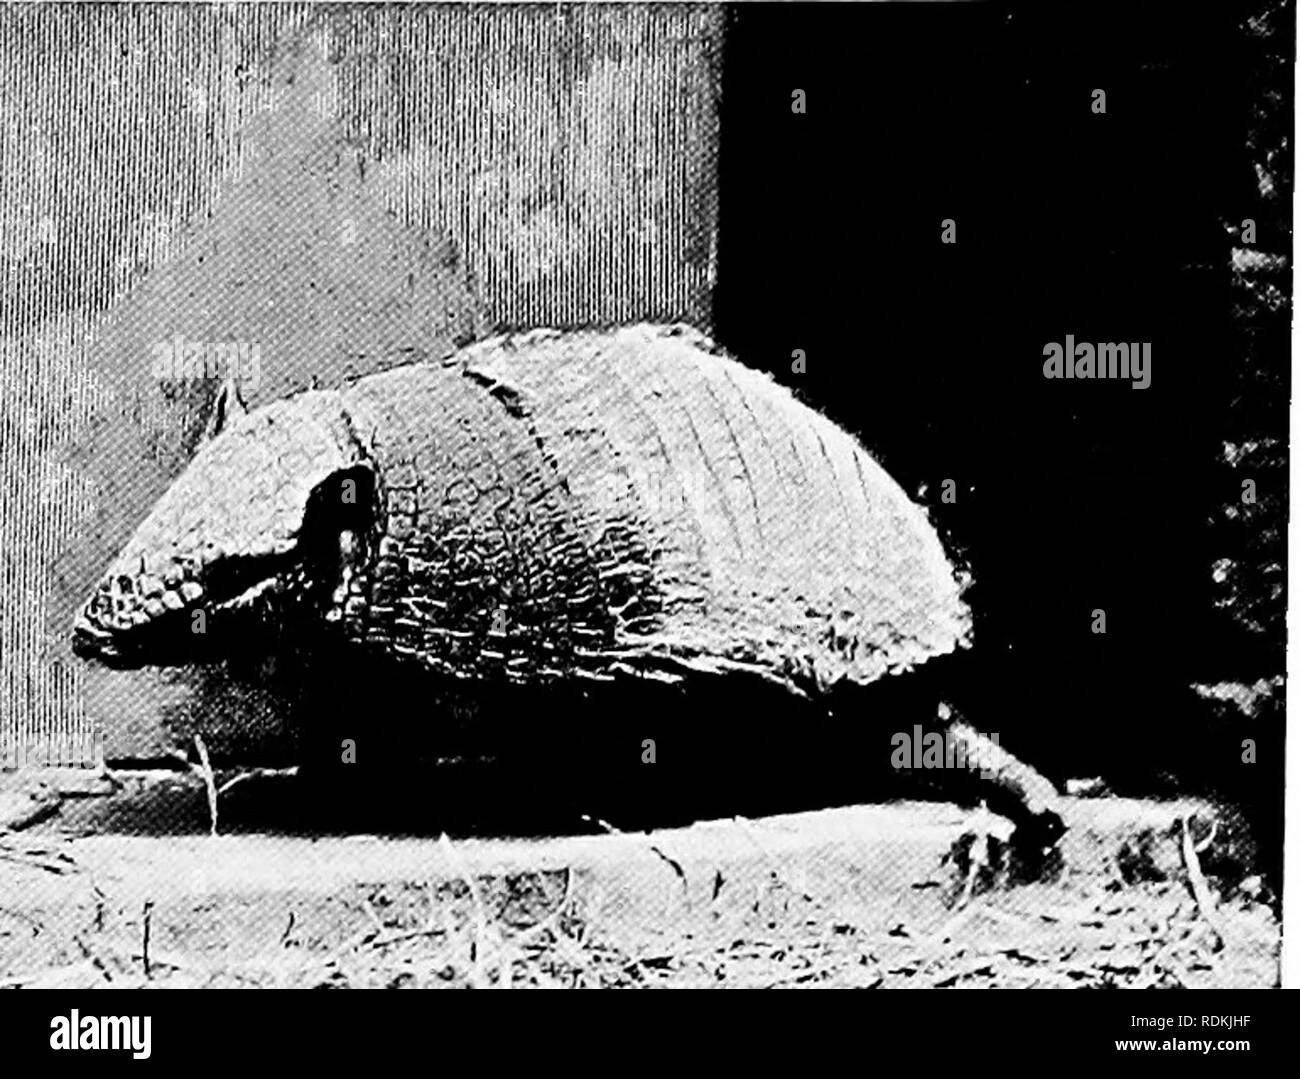 Scaly armour Black and White Stock Photos & Images - Alamy